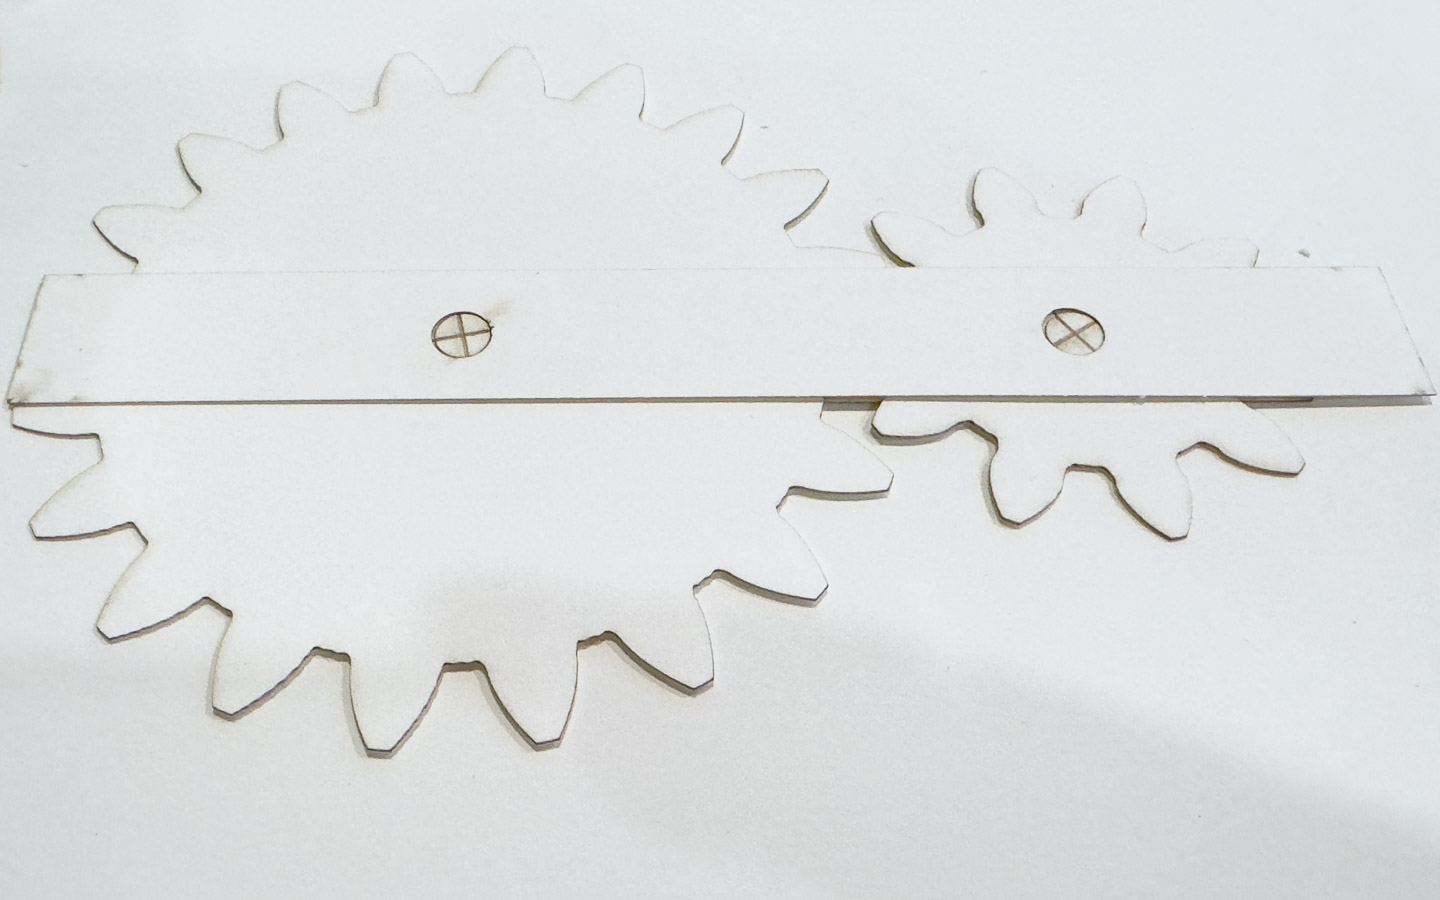 Two paper gears with a too-short paper brushing